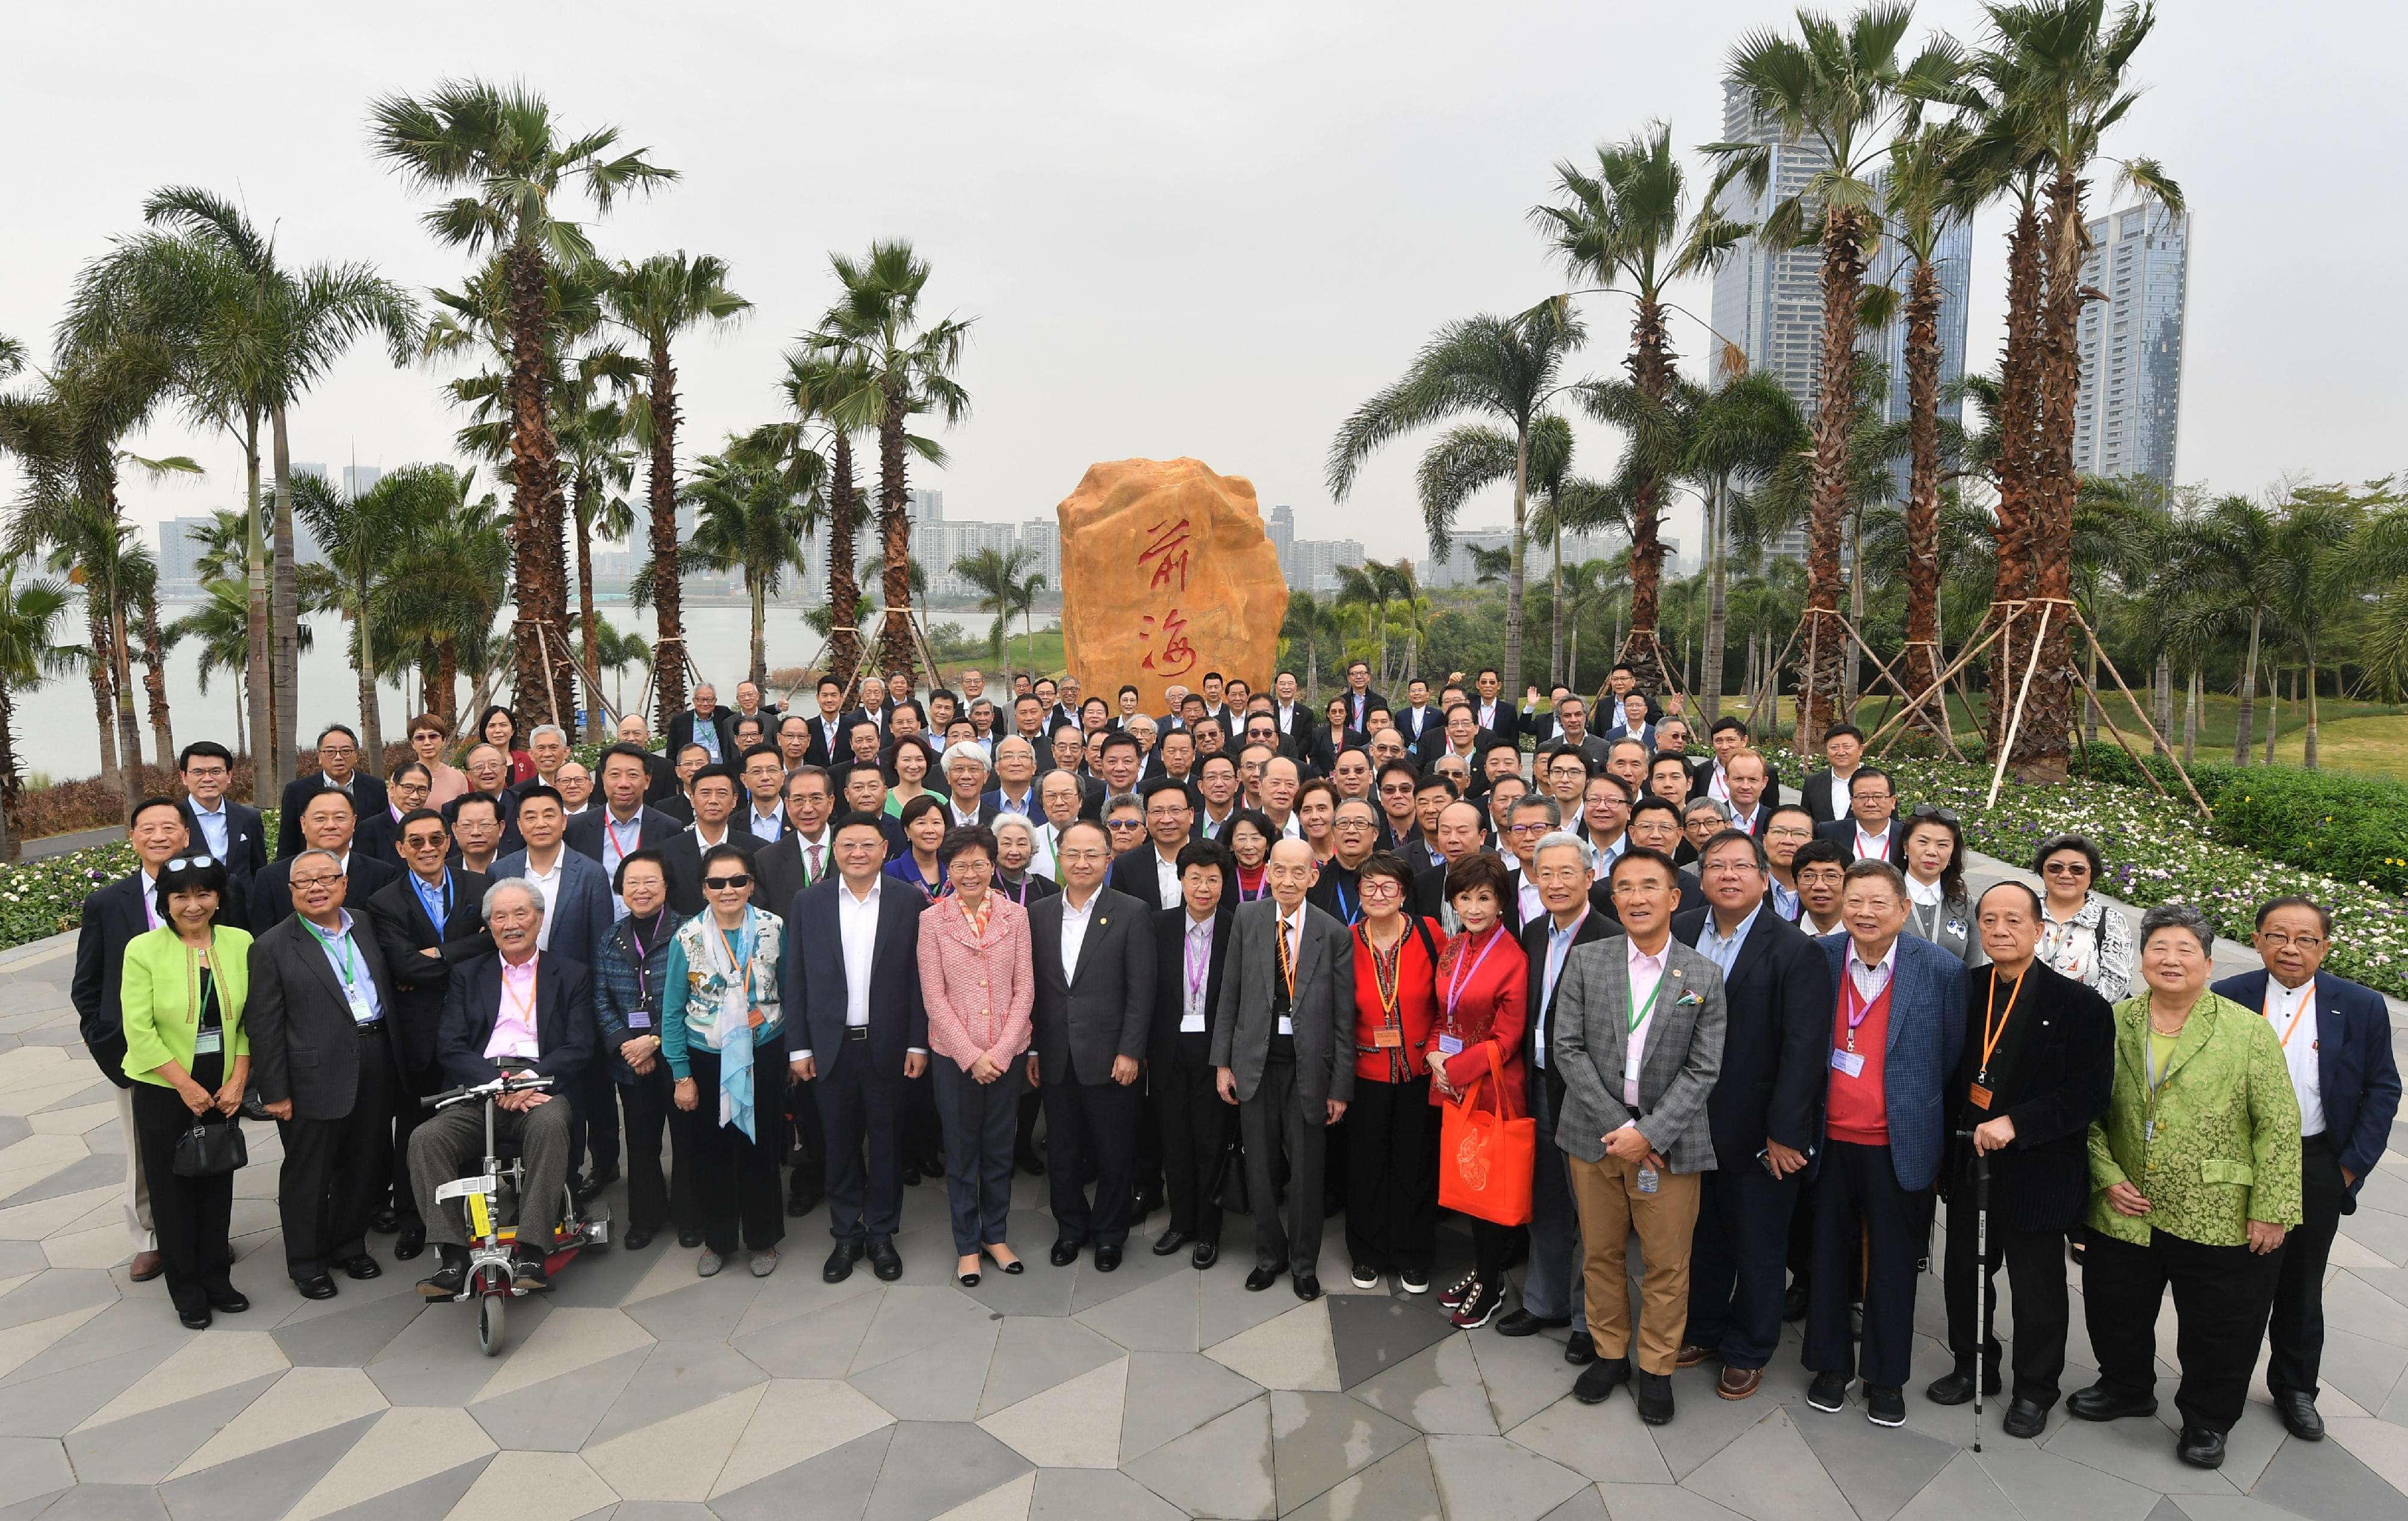 The Hong Kong delegation to Shenzhen in celebration of the 40th anniversary of the country's reform and opening up, led by the Chief Executive, Mrs Carrie Lam (front row, seventh left), were photographed at the Qianhai Stone Park on November 10, 2018.